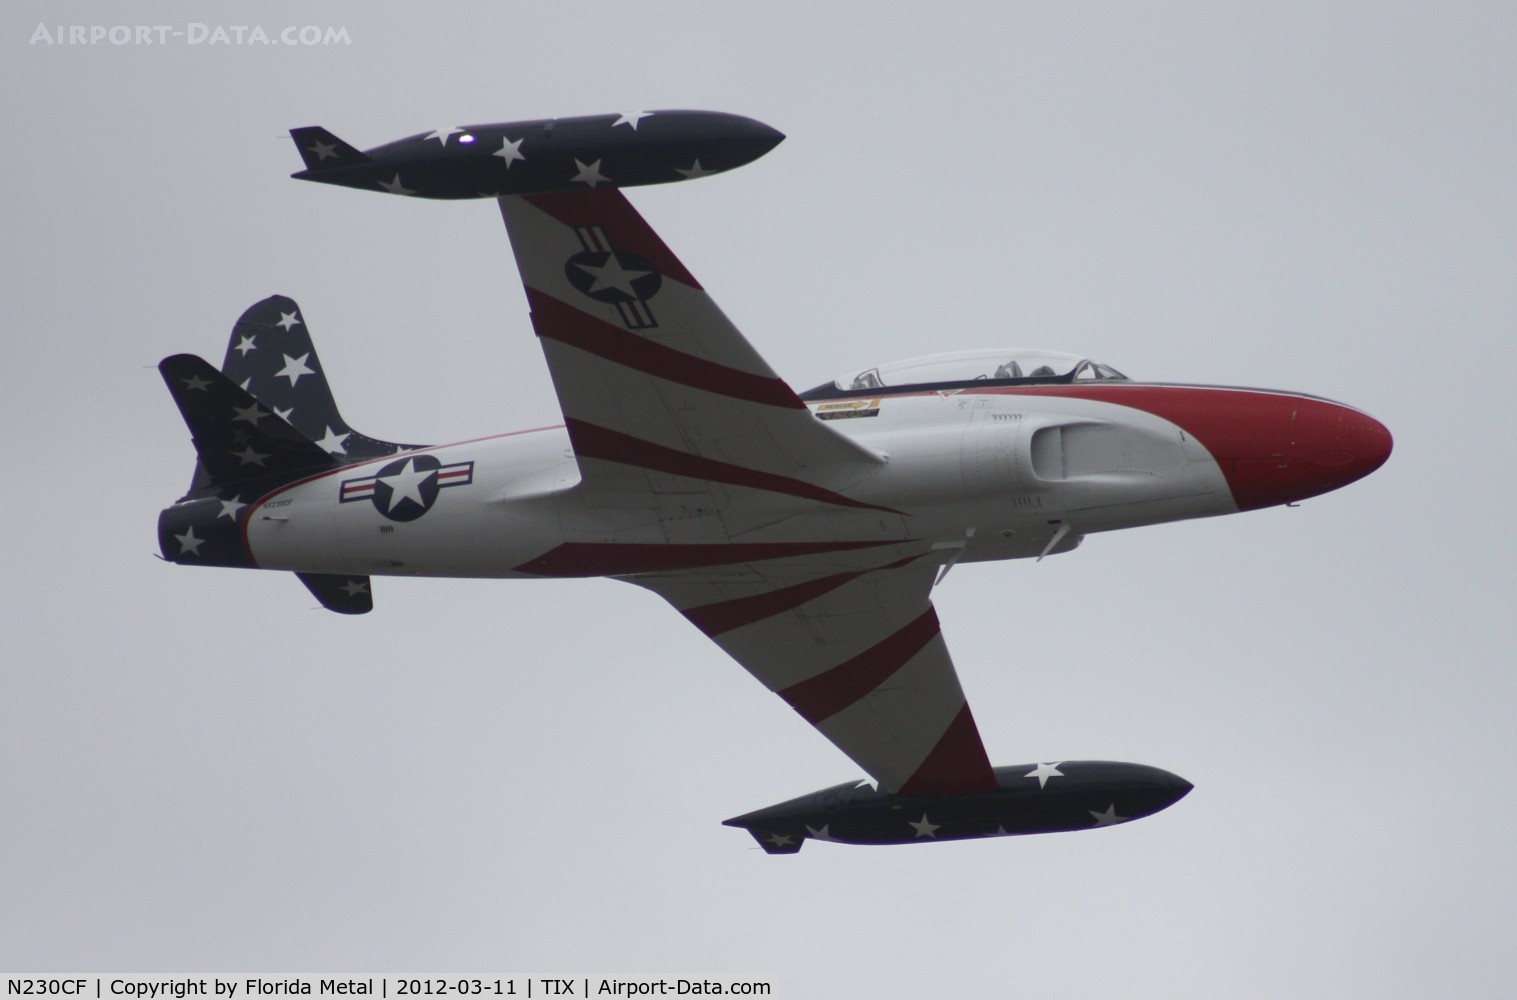 N230CF, 1953 Canadair CT-133 Silver Star 3 C/N T33-24, T-33 last year wore Navy colors for the Centennial